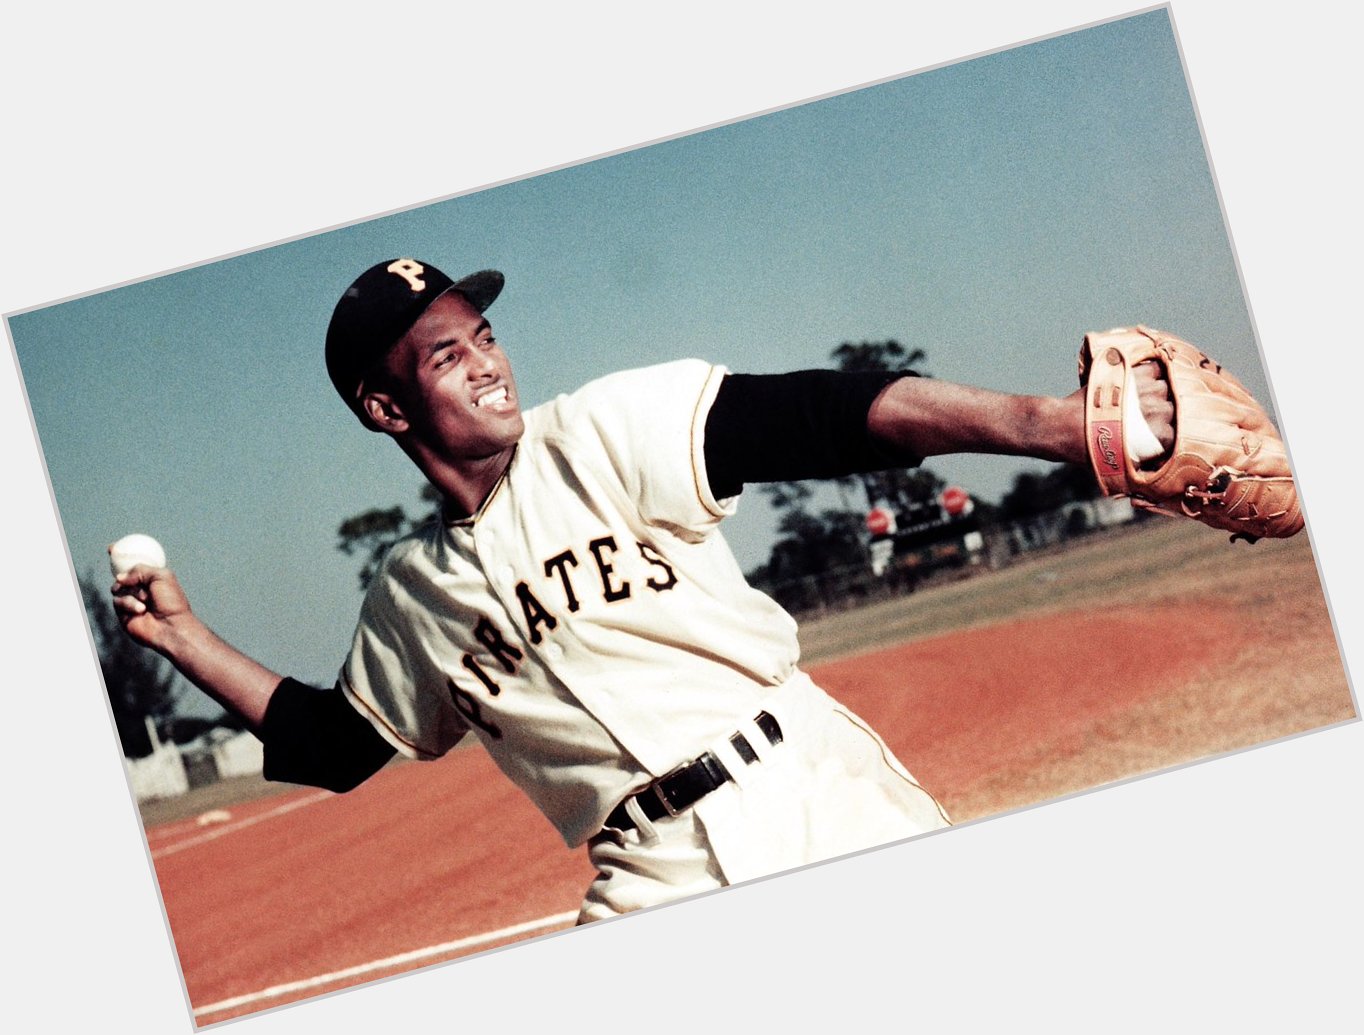 Happy birthday to Roberto Clemente! Thank you for all you did on and off the field!  